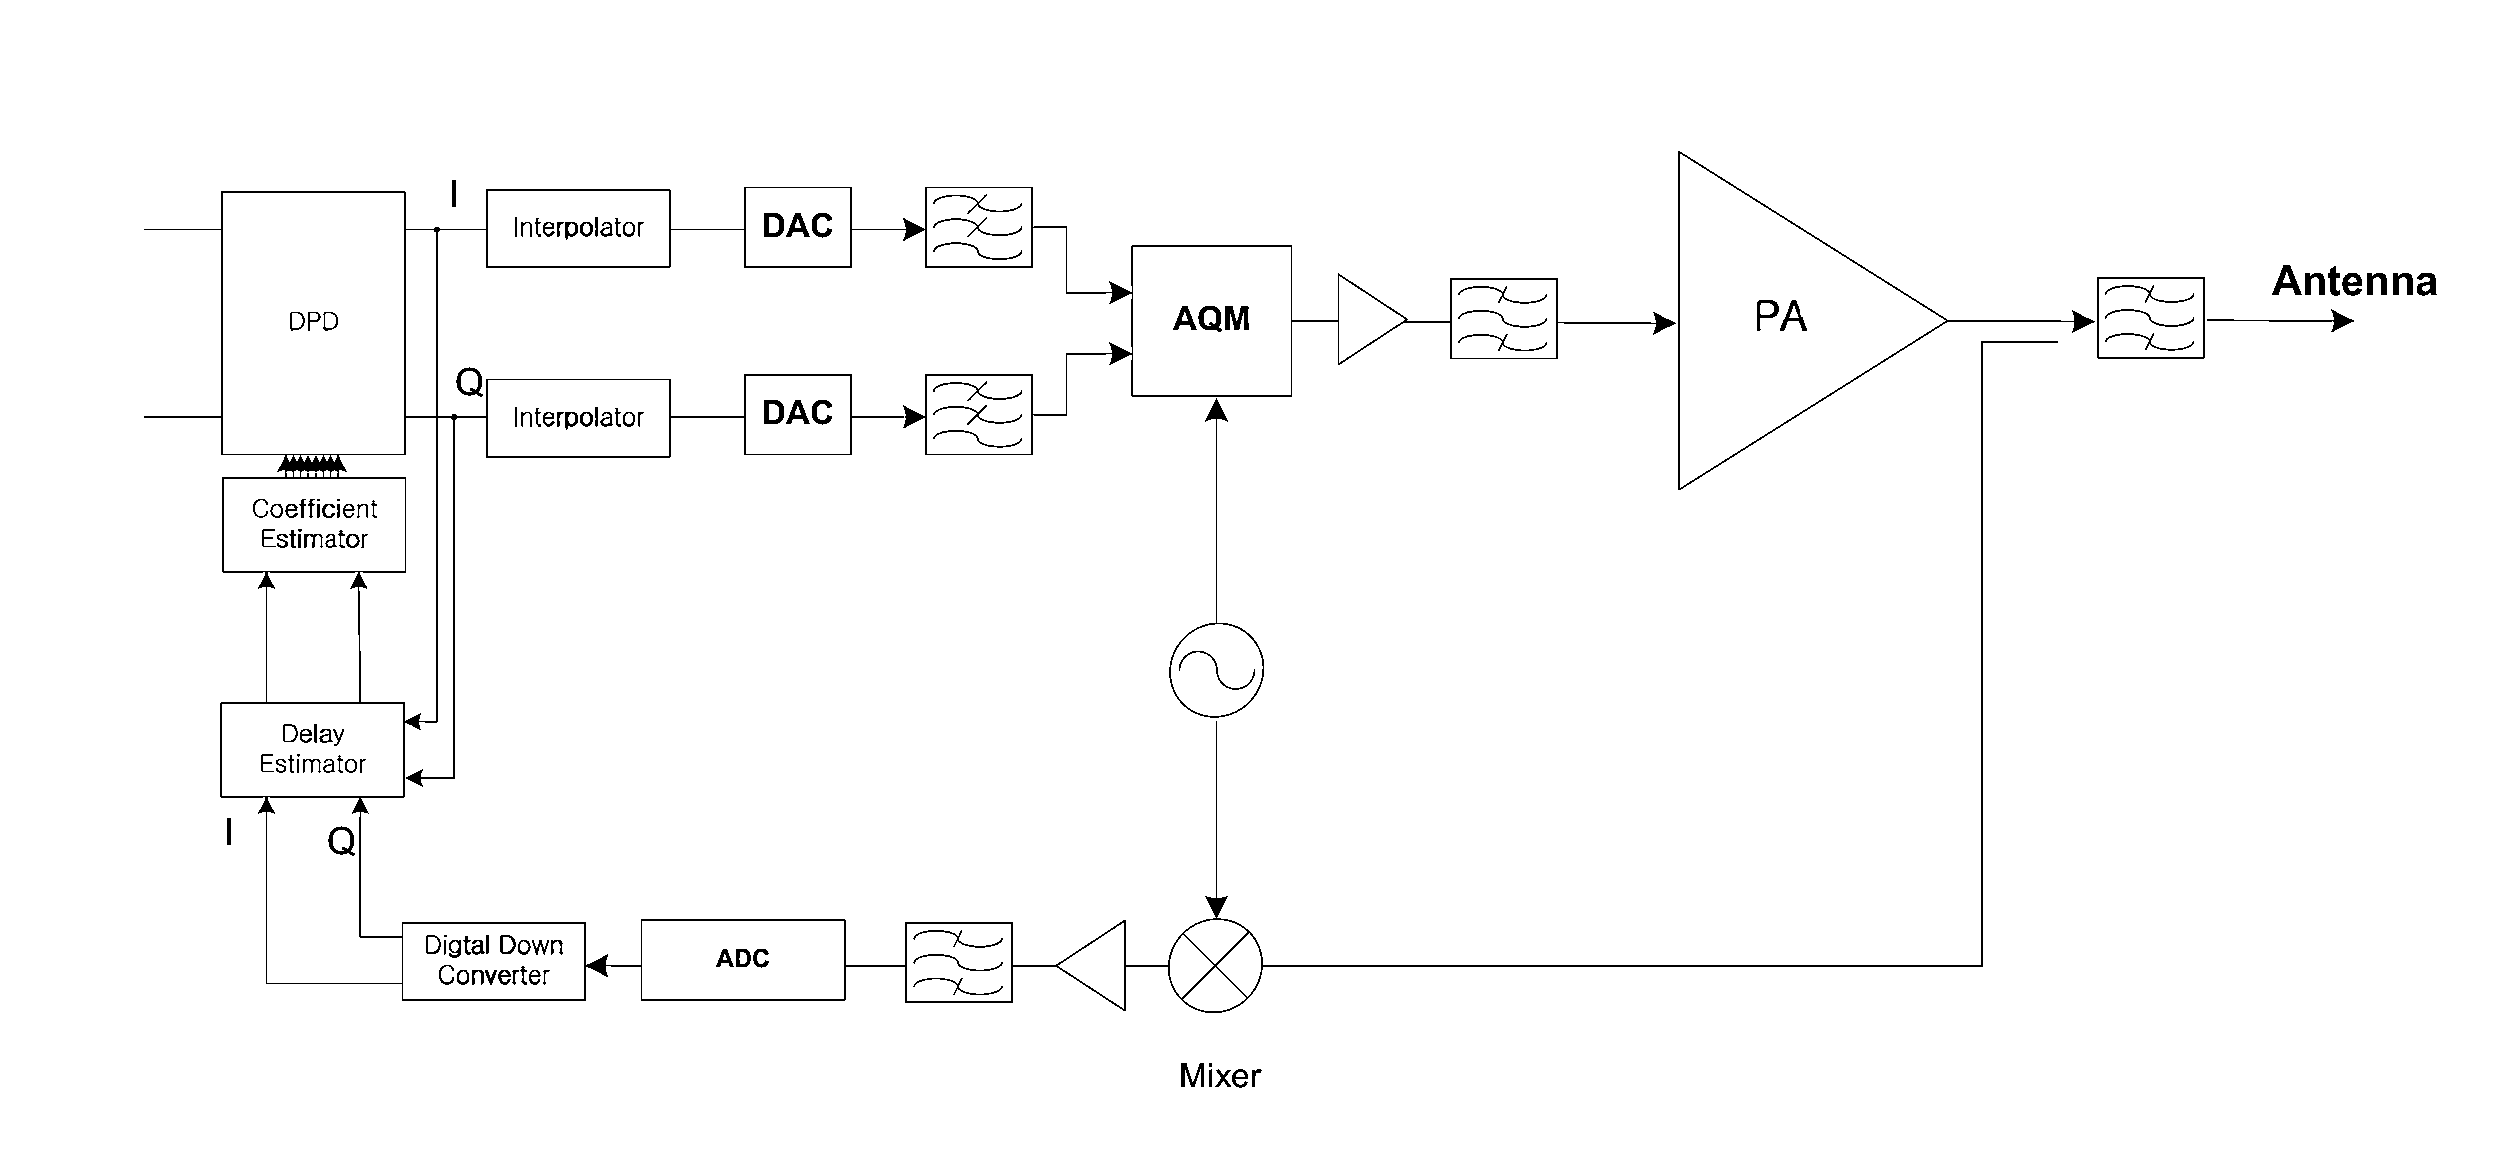 Method and system for aligning signals widely spaced in frequency for wideband digital predistortion in wireless communication systems